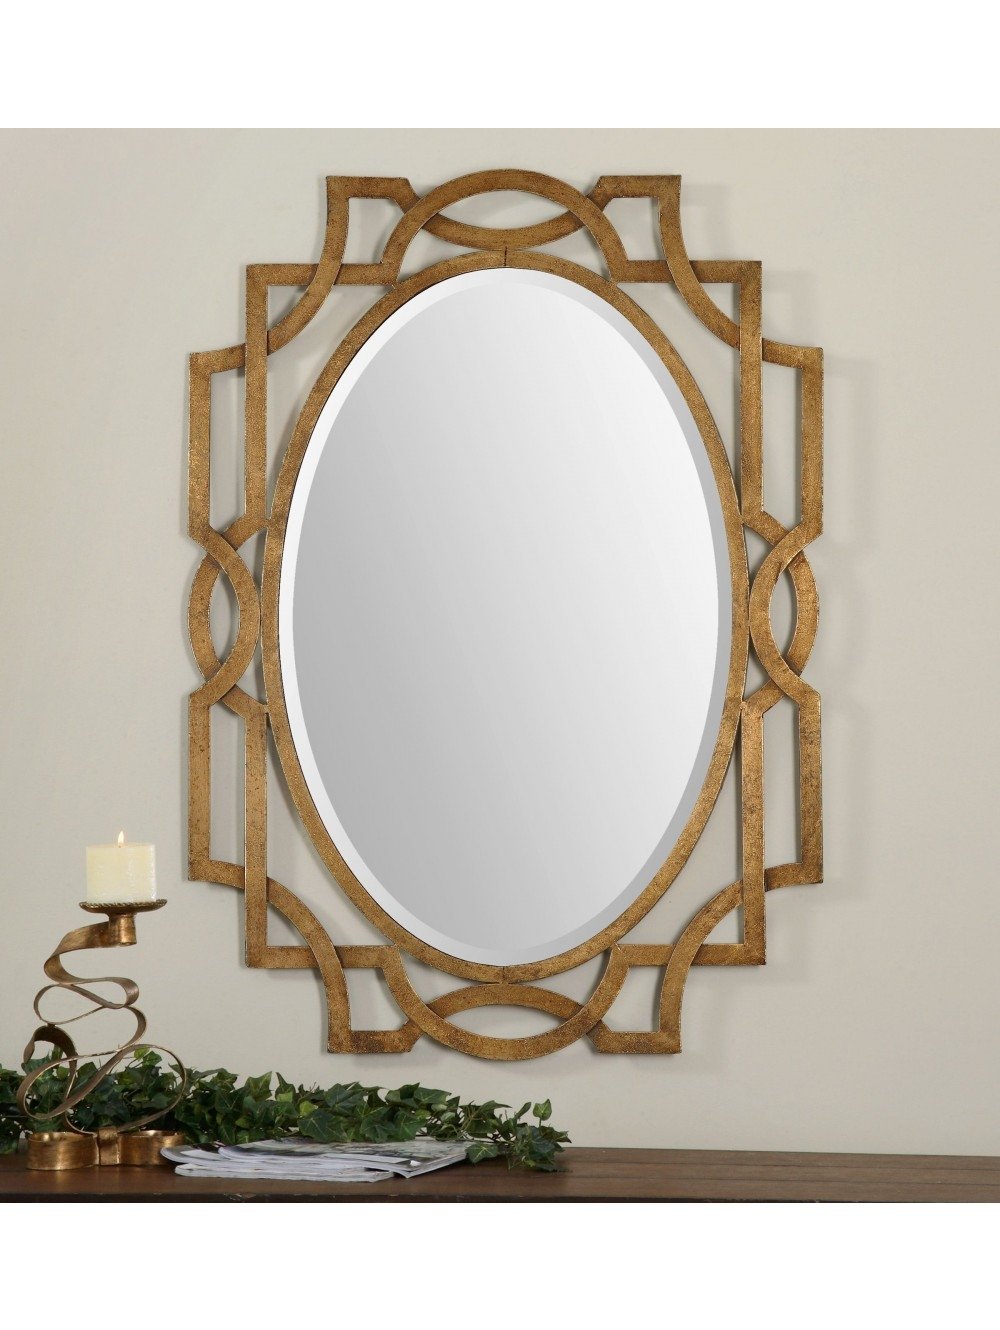 Gold Oval Accent Mirror - Image 1